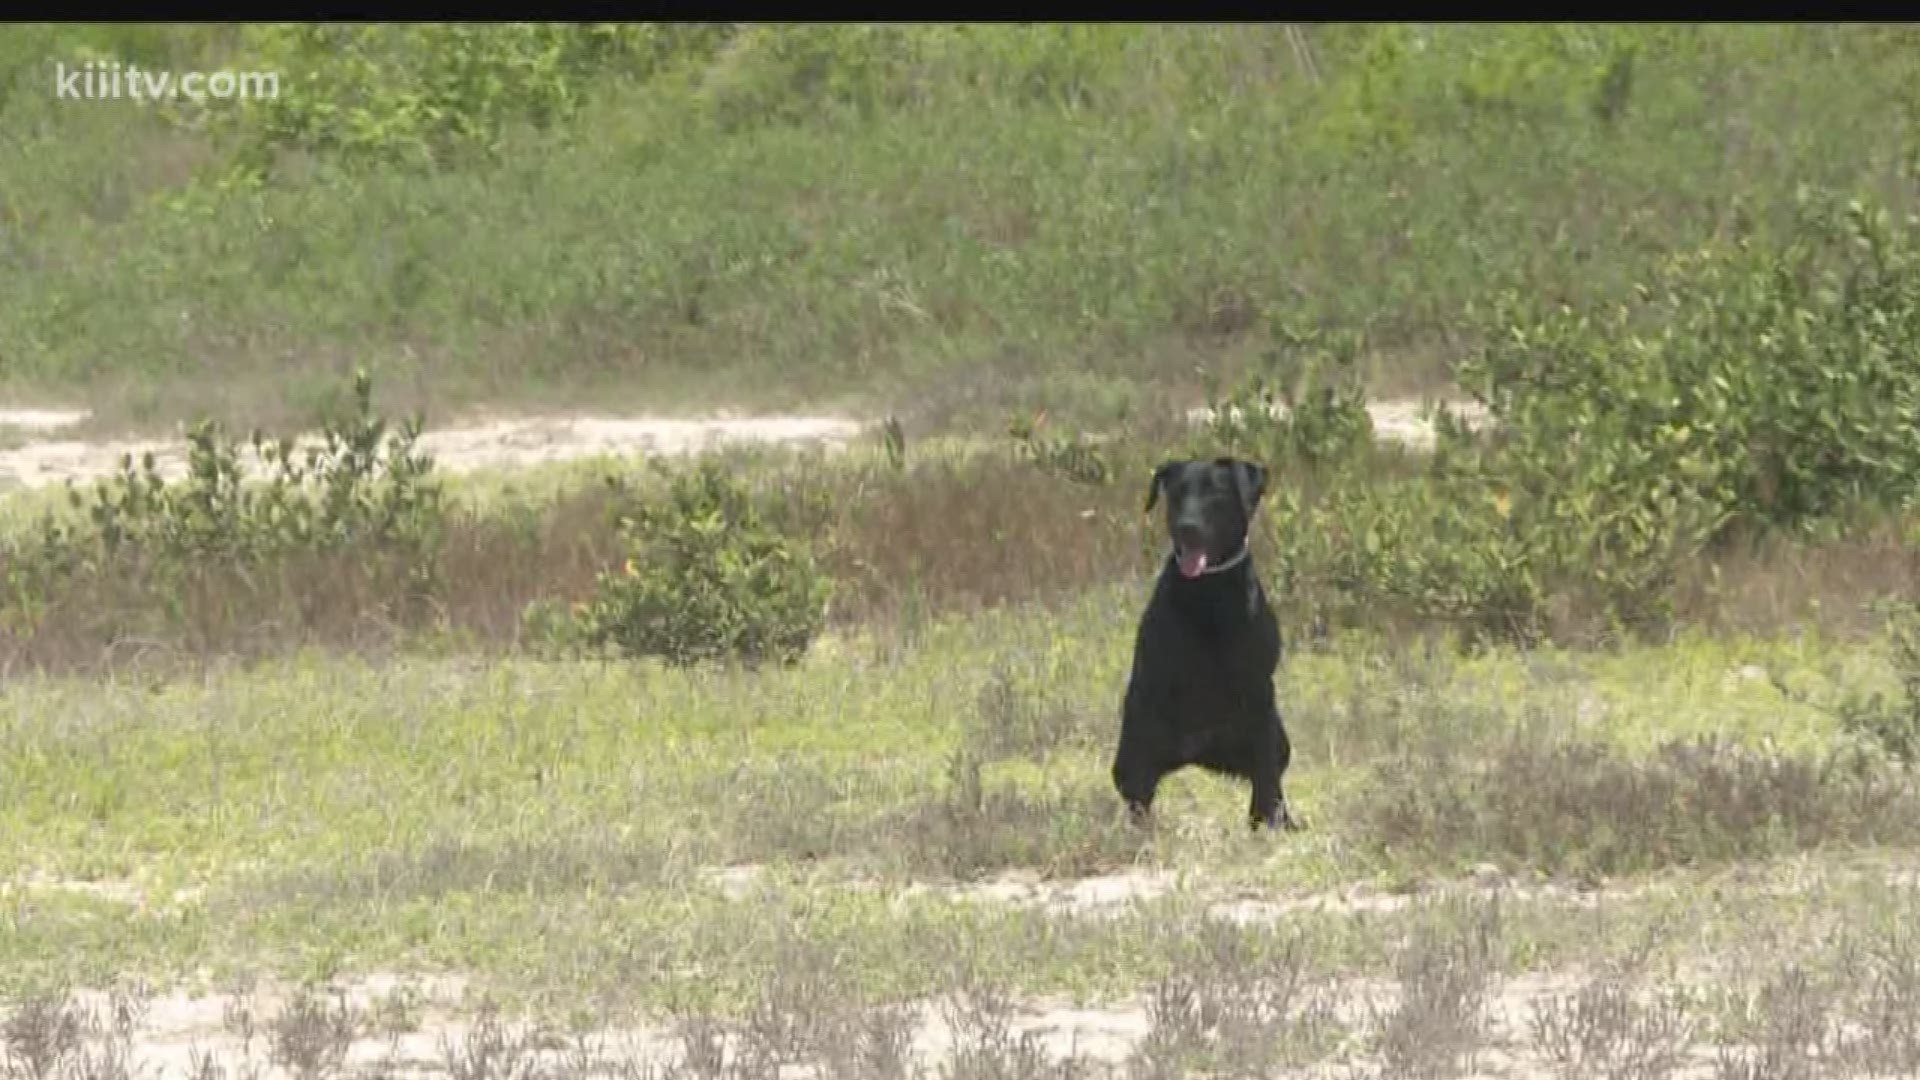 Researchers at the oil spill control school at Texas A&M University-Corpus Christi Monday got a demonstration of one way to discover those oil deposits using a specially trained K-9.